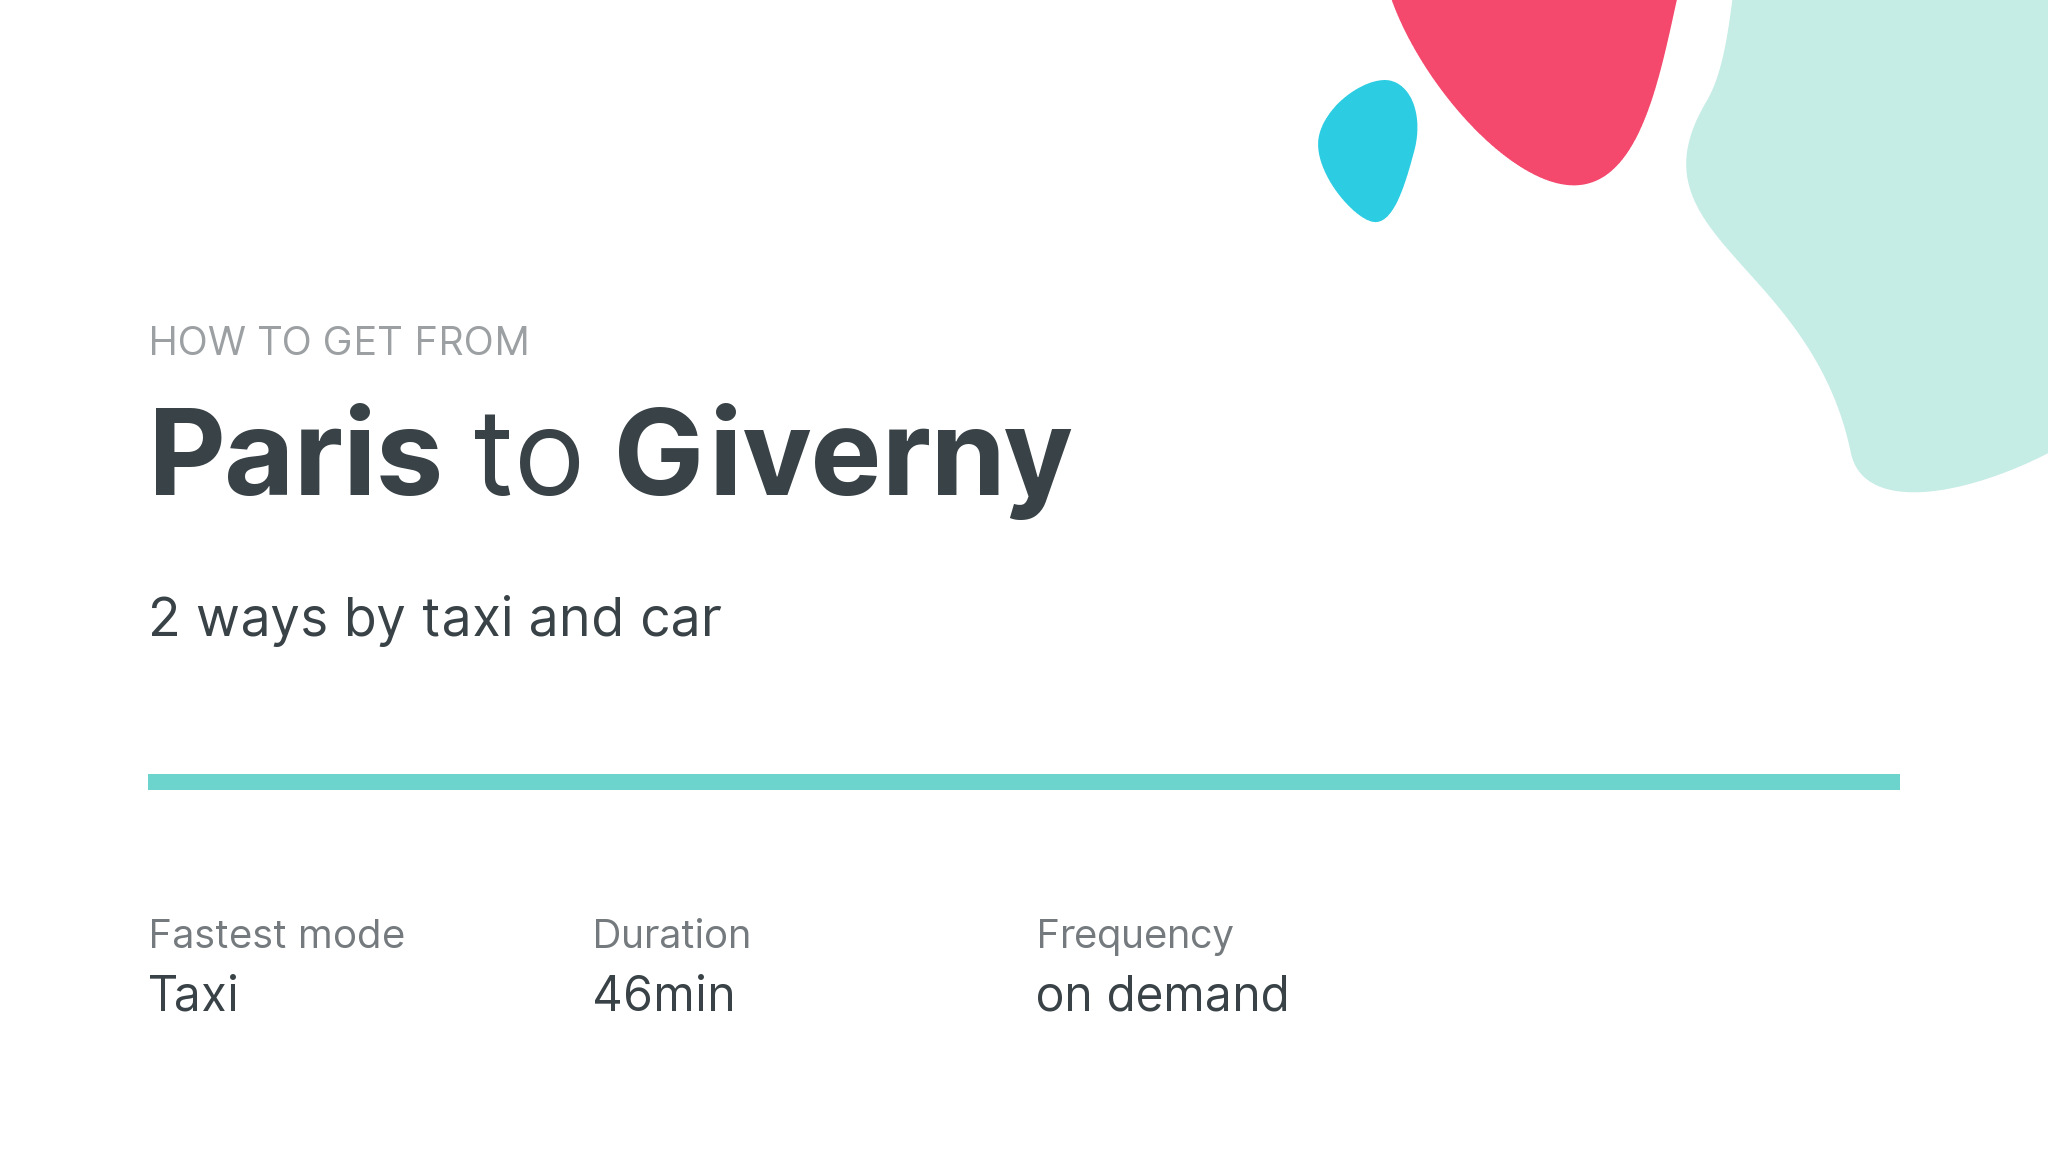 How do I get from Paris to Giverny